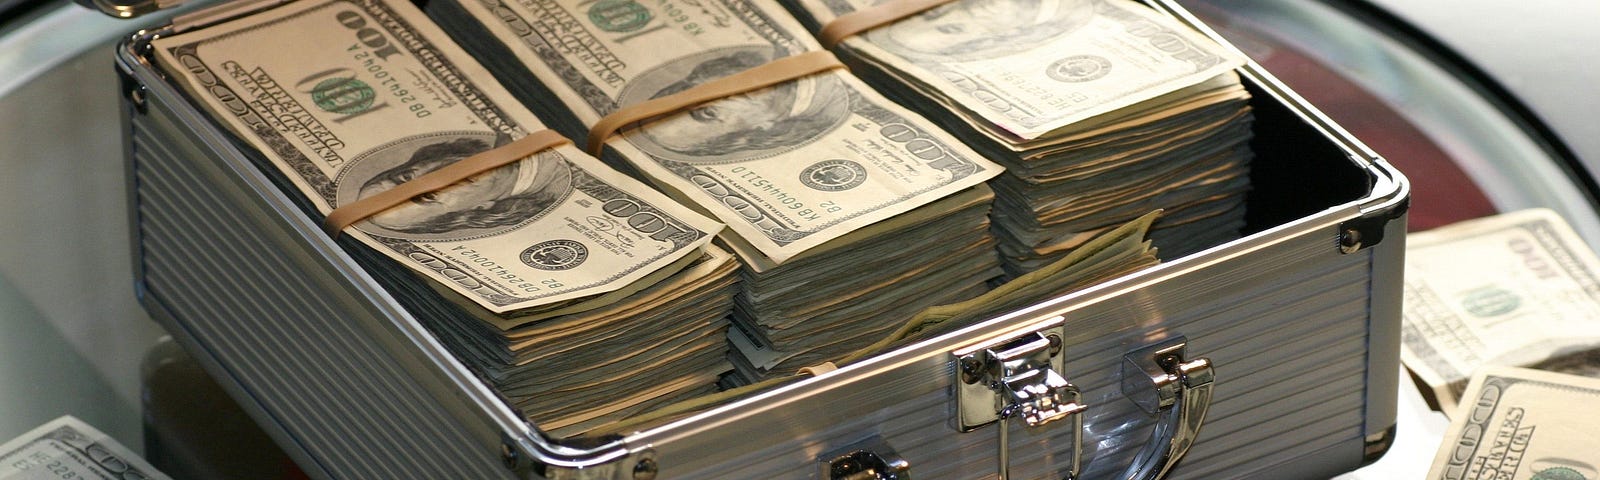 image of money in a case to represent money paid for a data breach settlement.